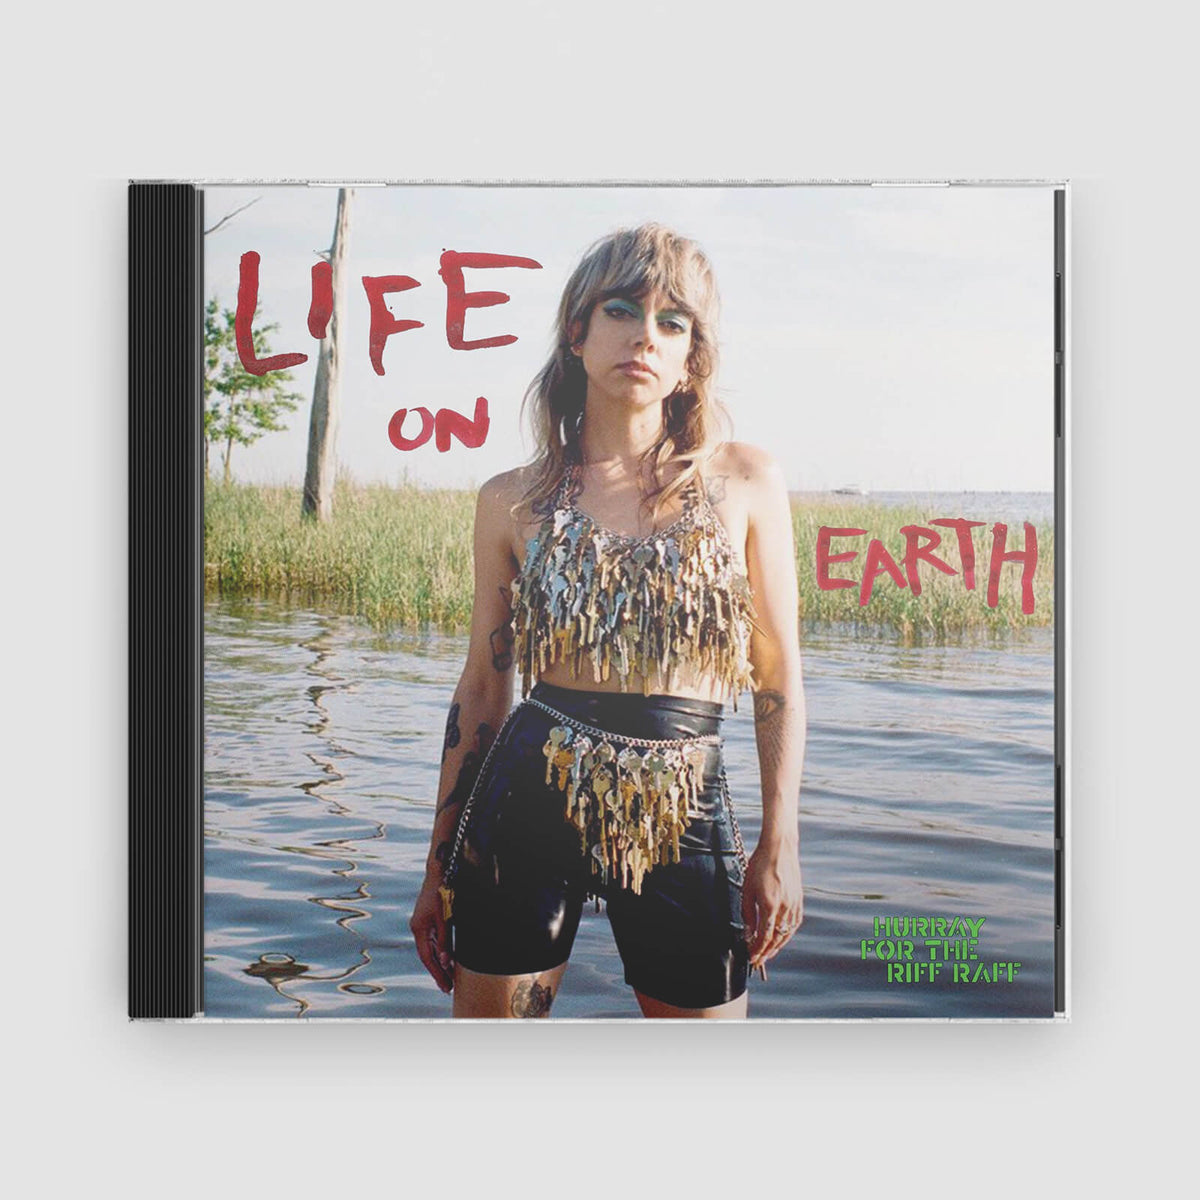 Hurray for the Riff Raff : Life On Earth